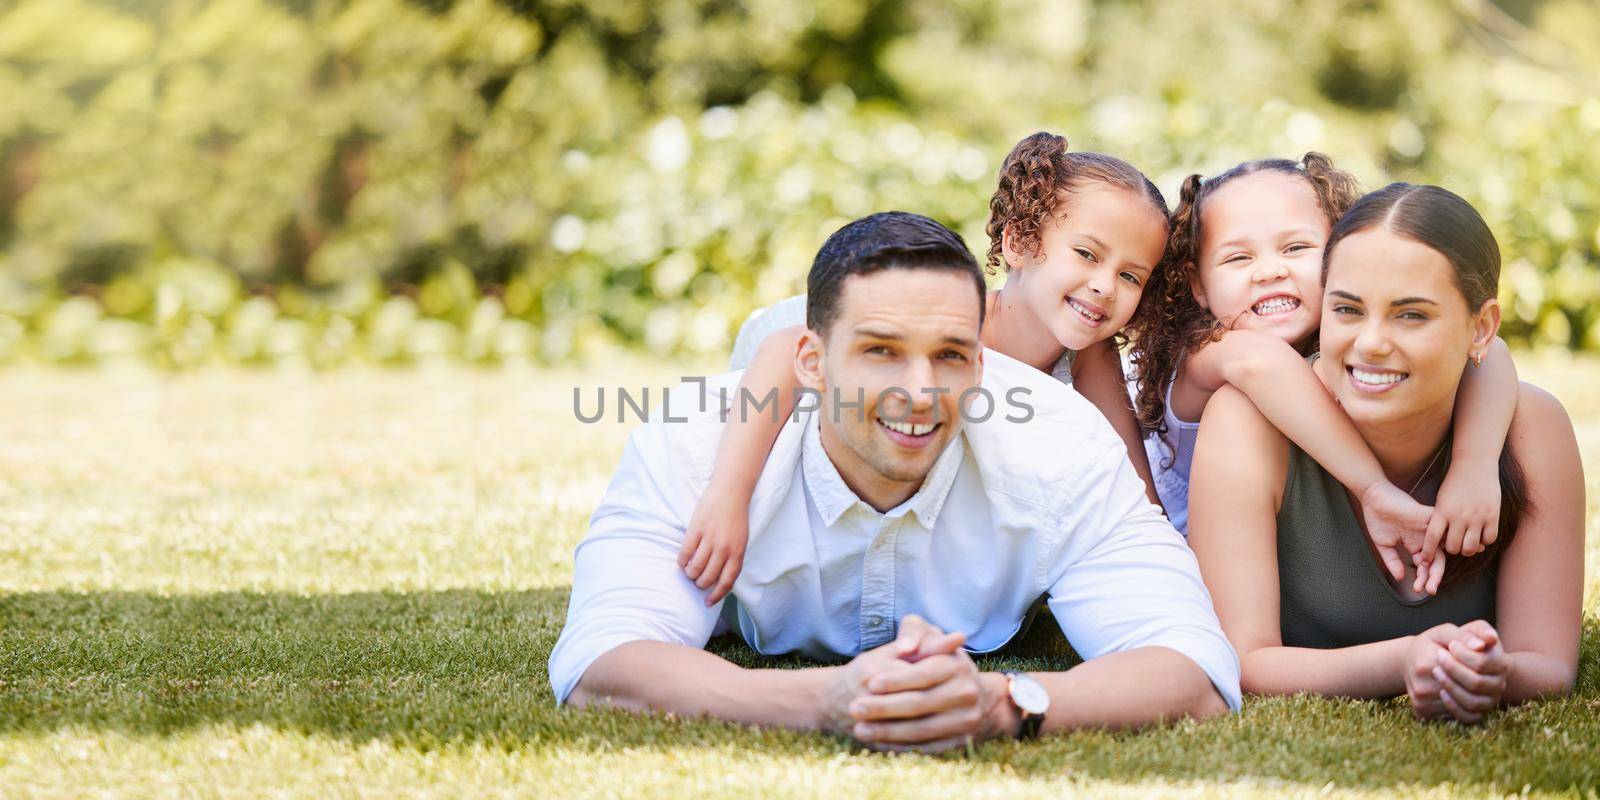 Todays moments make tomorrows memories. Portrait of a happy young family enjoying a fun day out at the park